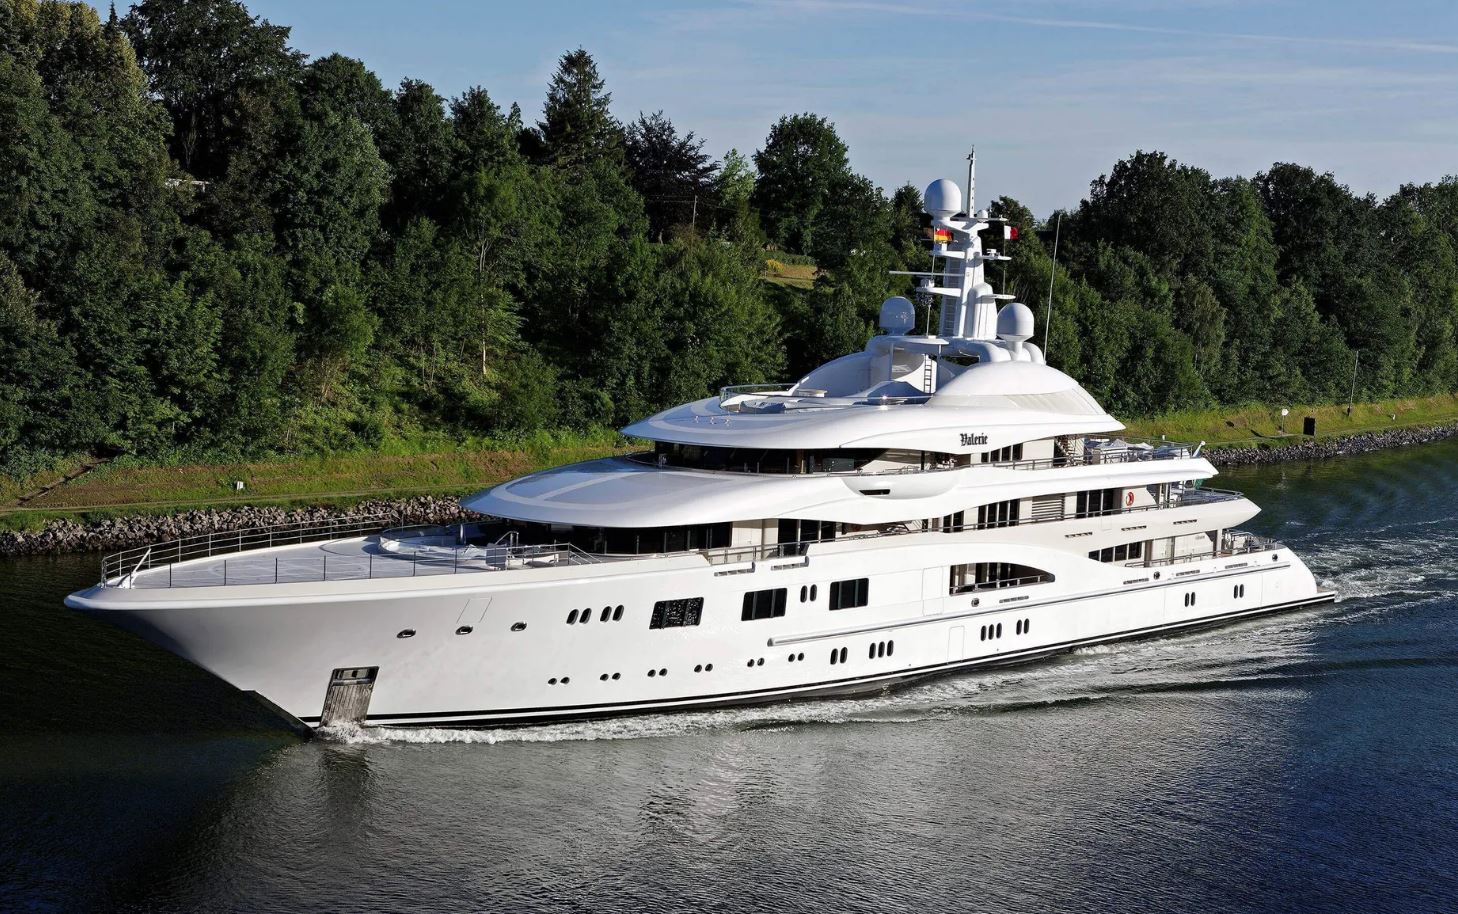 who owns the superyacht valerie